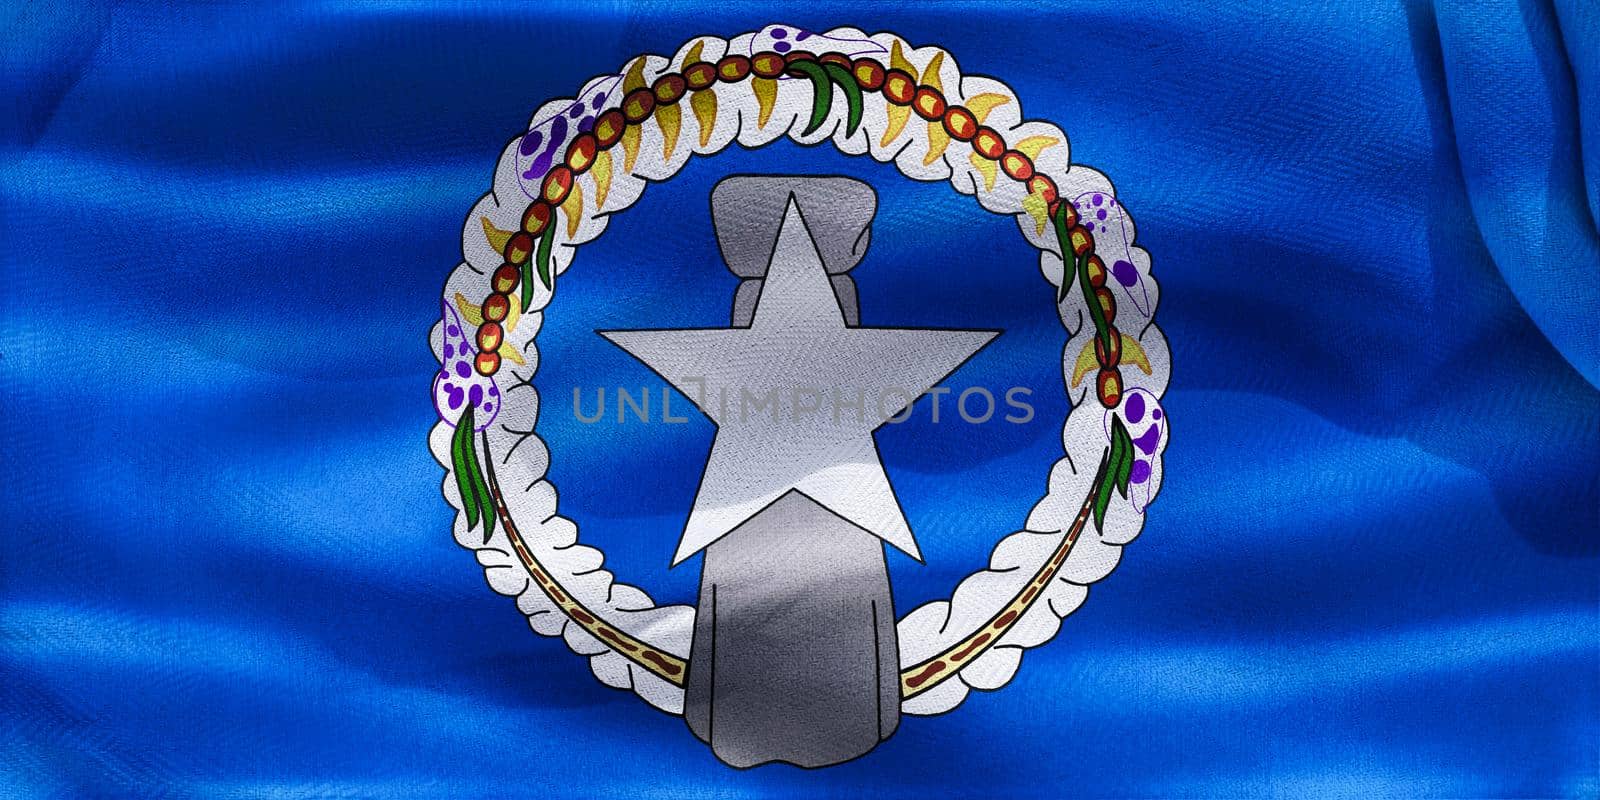 3D-Illustration of a Mariana Islands flag - realistic waving fabric flag by MP_foto71